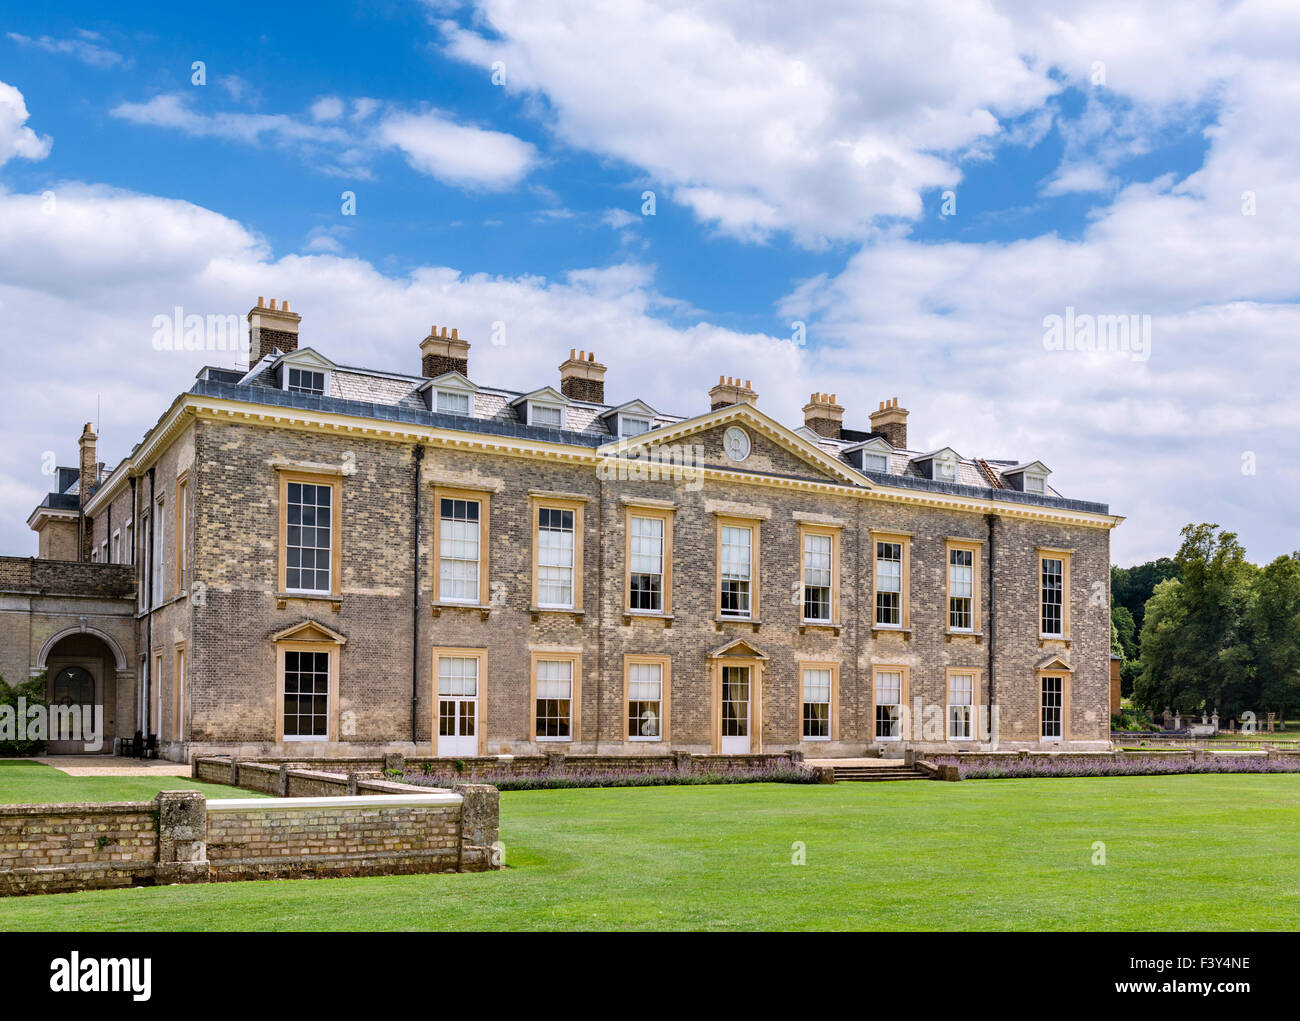 The rear of Althorp house, seat of Earl Spencer and childhood home of Diana Princess of Wales, Northamptonshire, England, UK Stock Photo